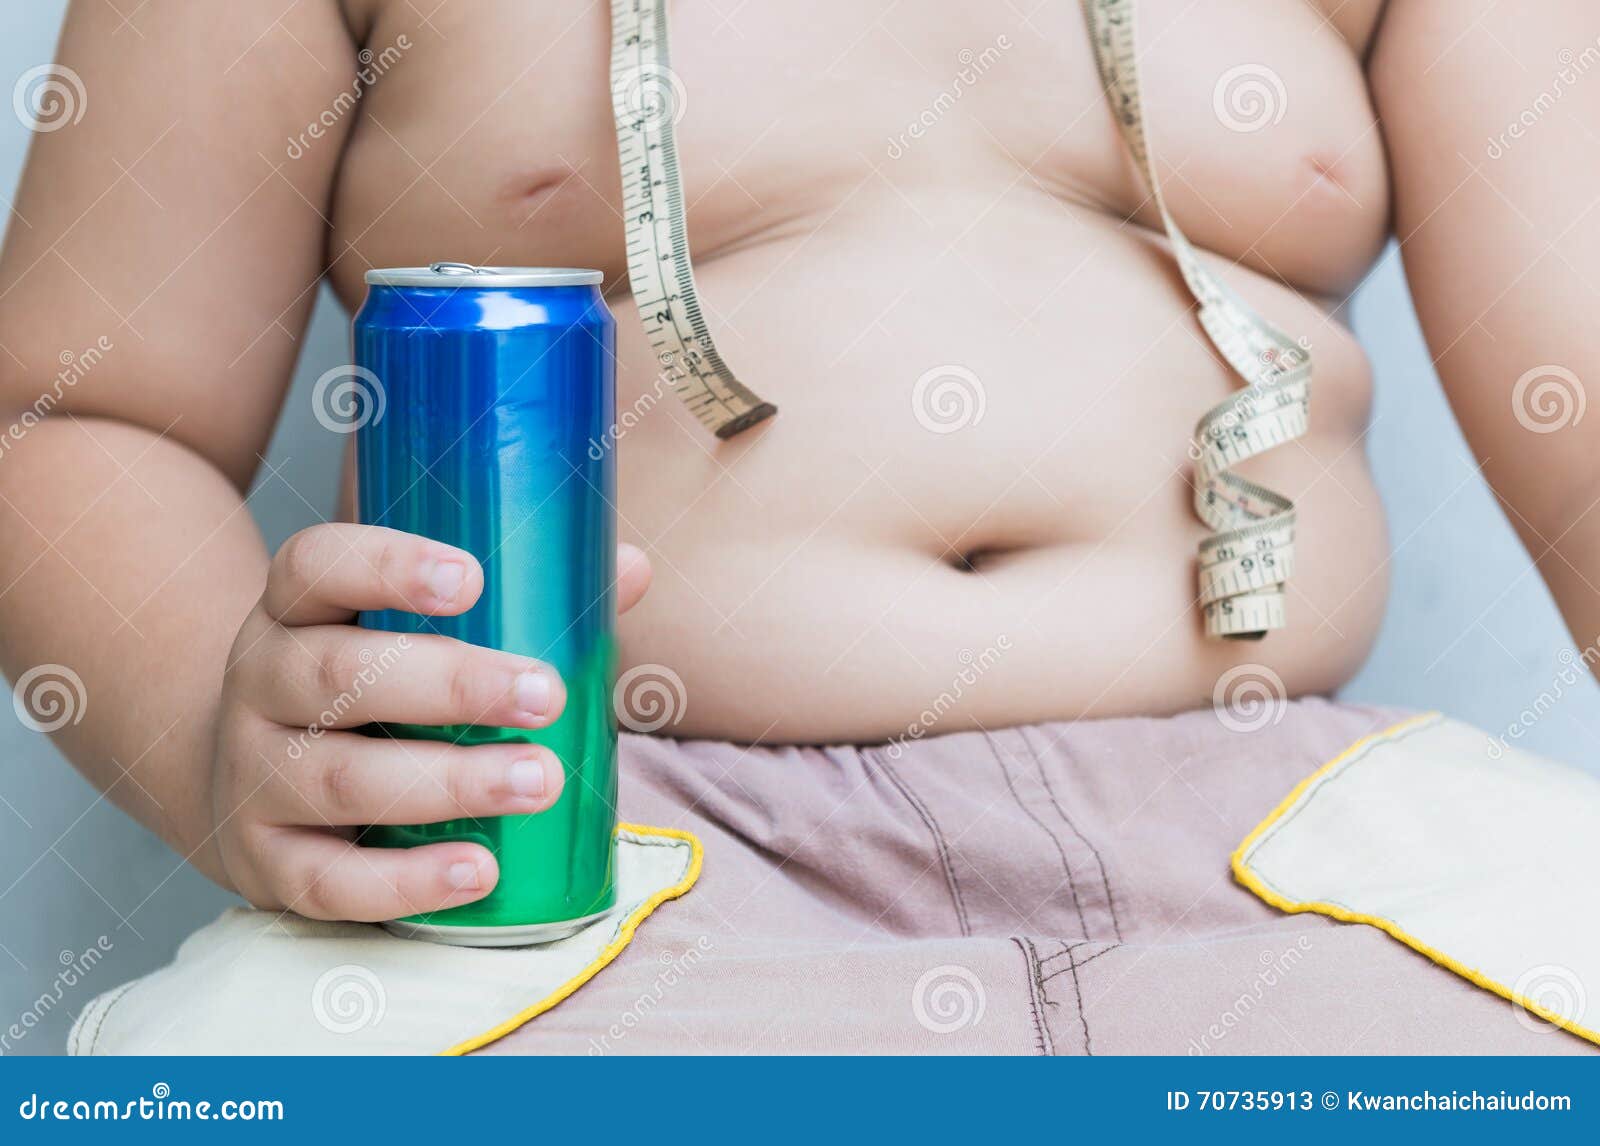 https://thumbs.dreamstime.com/z/diet-obese-fat-boy-holding-soft-drink-can-gray-background-70735913.jpg